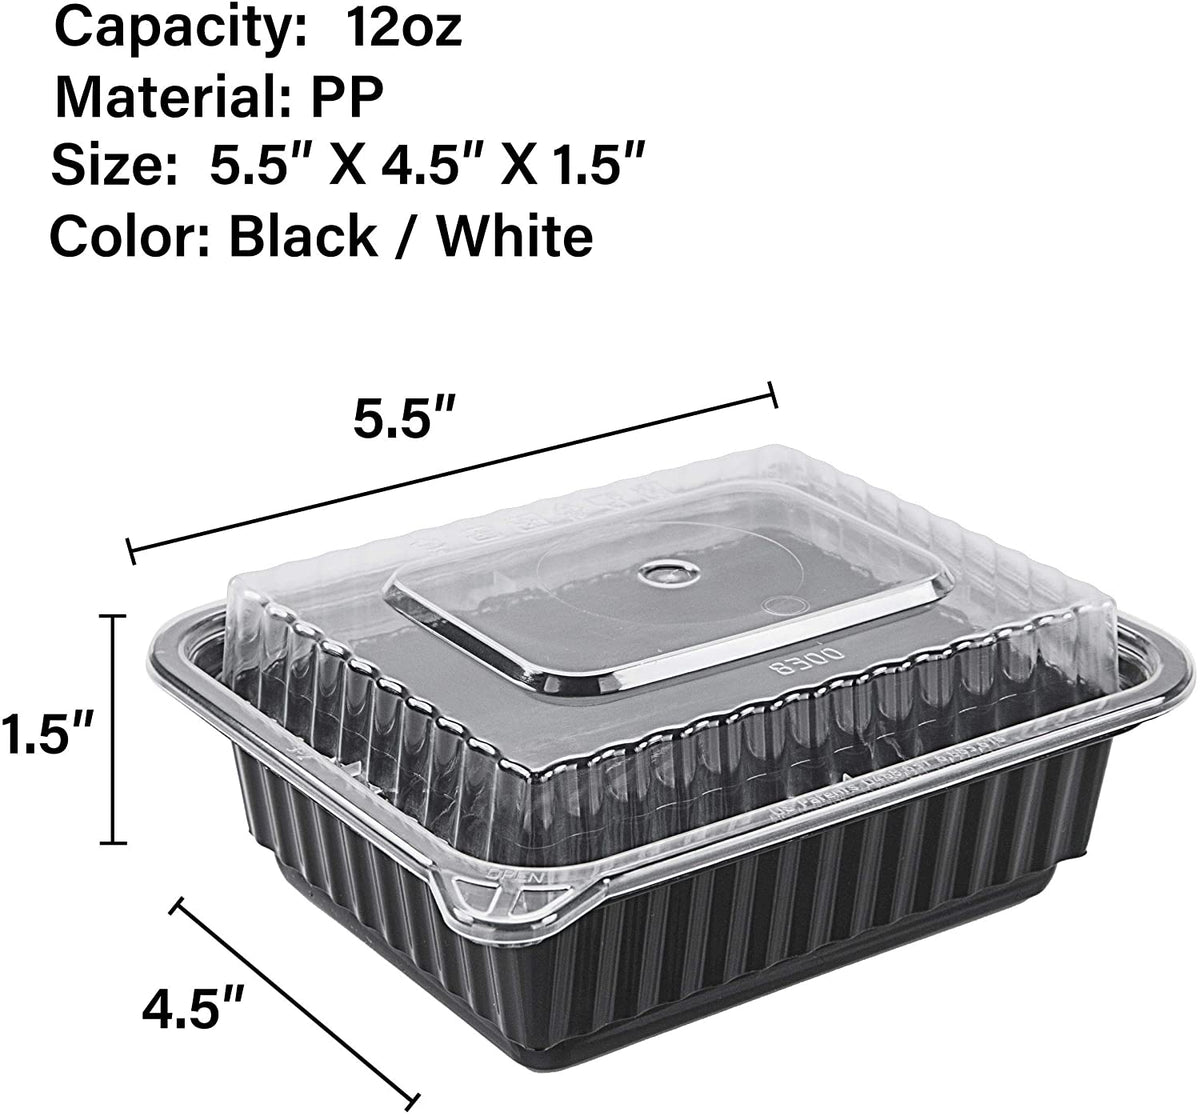 CTC-008] 1 Compartment Rectangular Meal Prep Container with Lids - 28 – CTC  Packaging